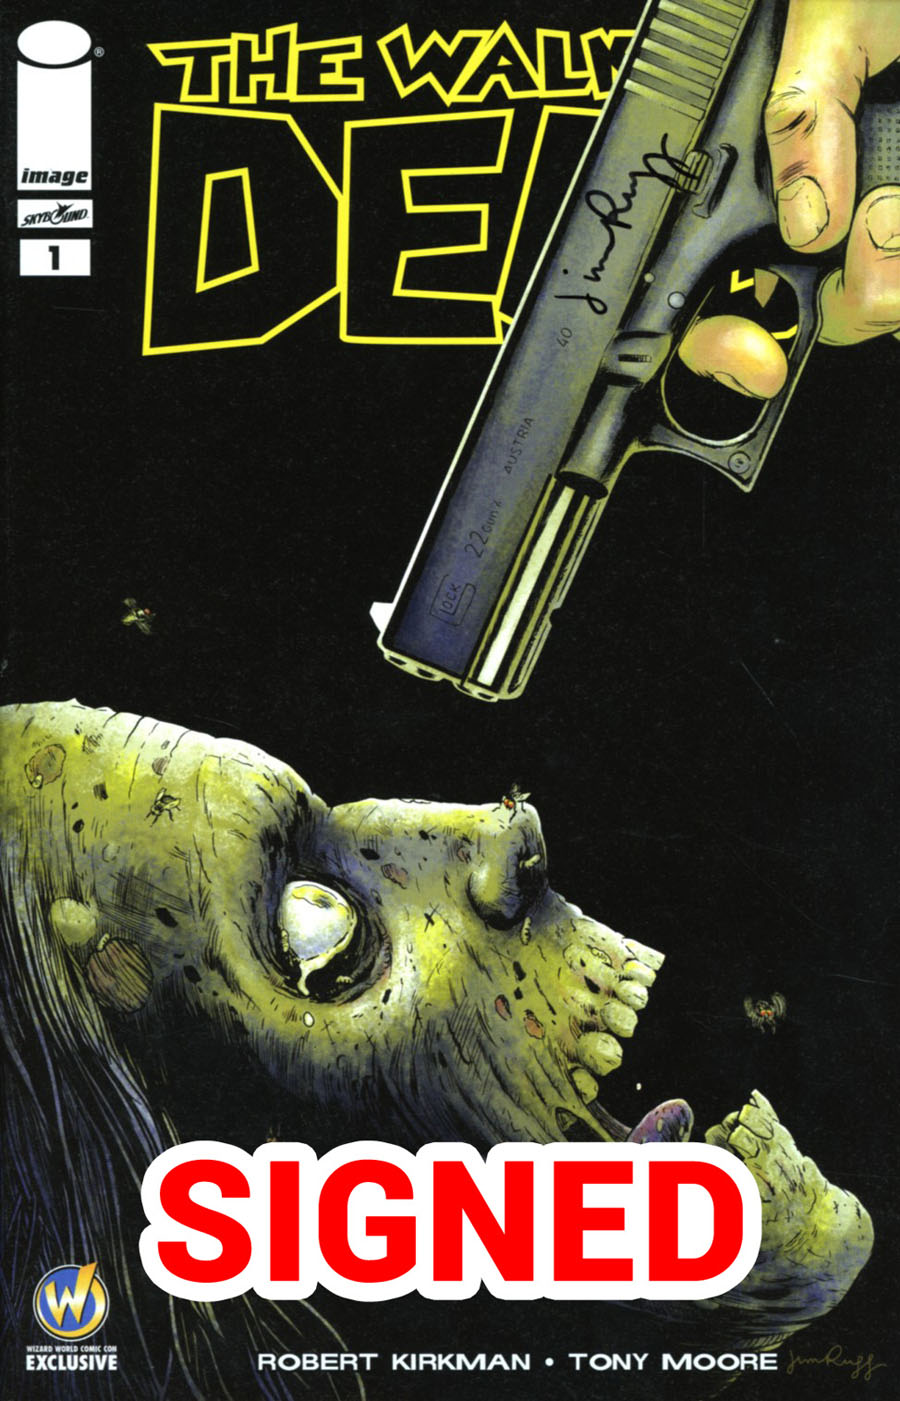 Walking Dead #1 Cover Z Wizard World Comic Con Pittsburgh Exclusive Jim Rugg Color Variant Cover Signed By Jim Rugg